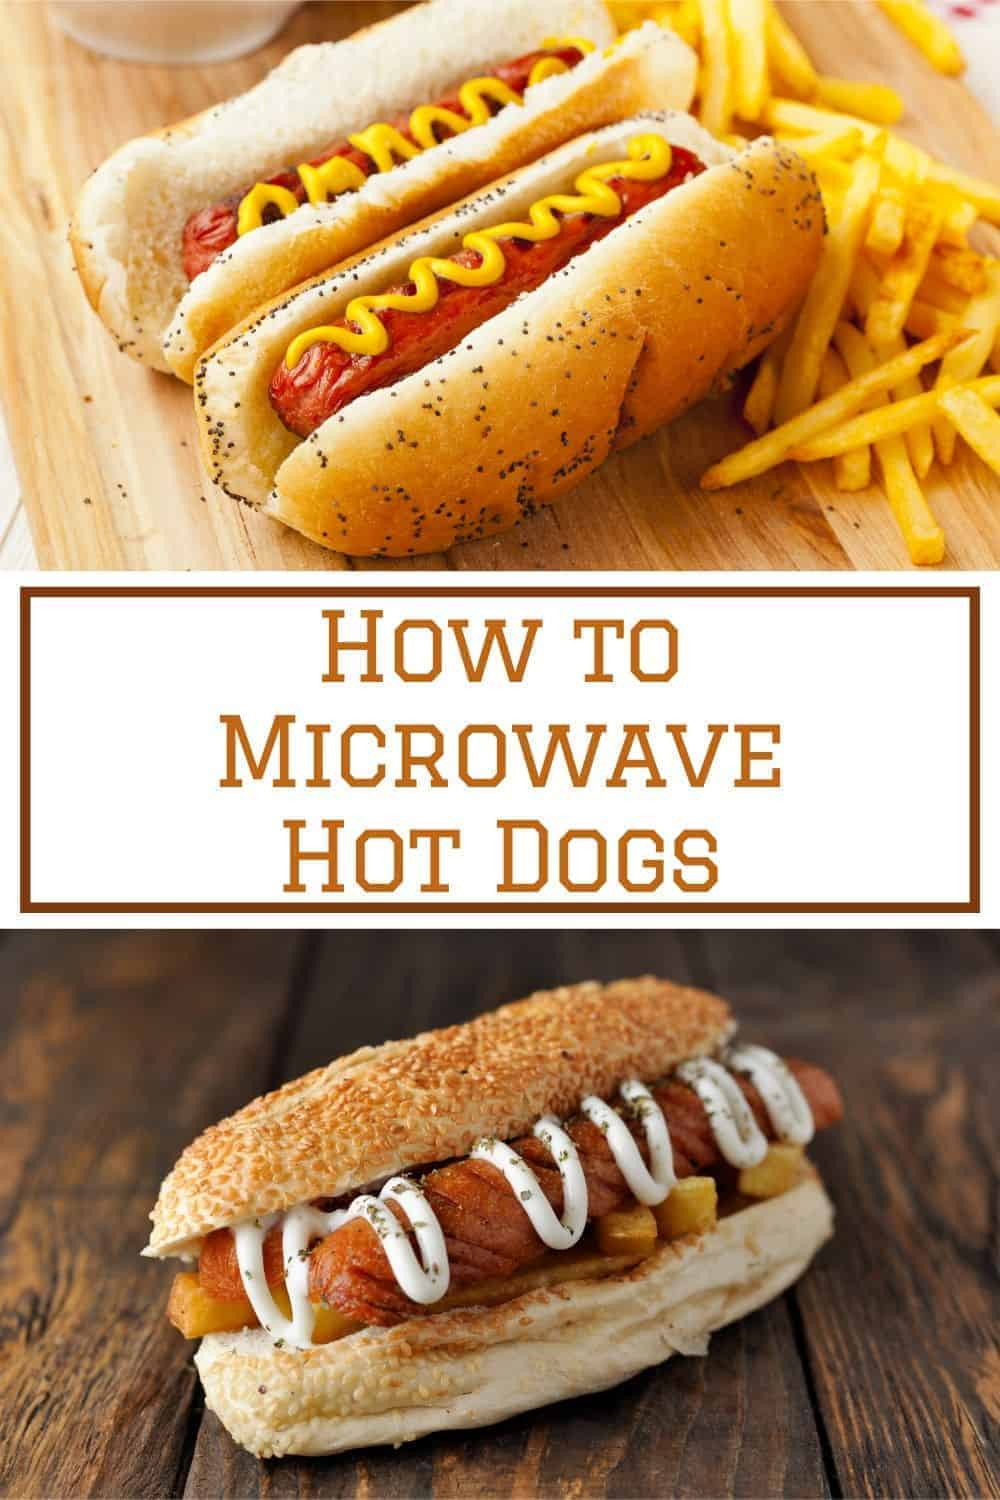 Best Way To Microwave Hot Dogs
 How to microwave hot dogs that taste good